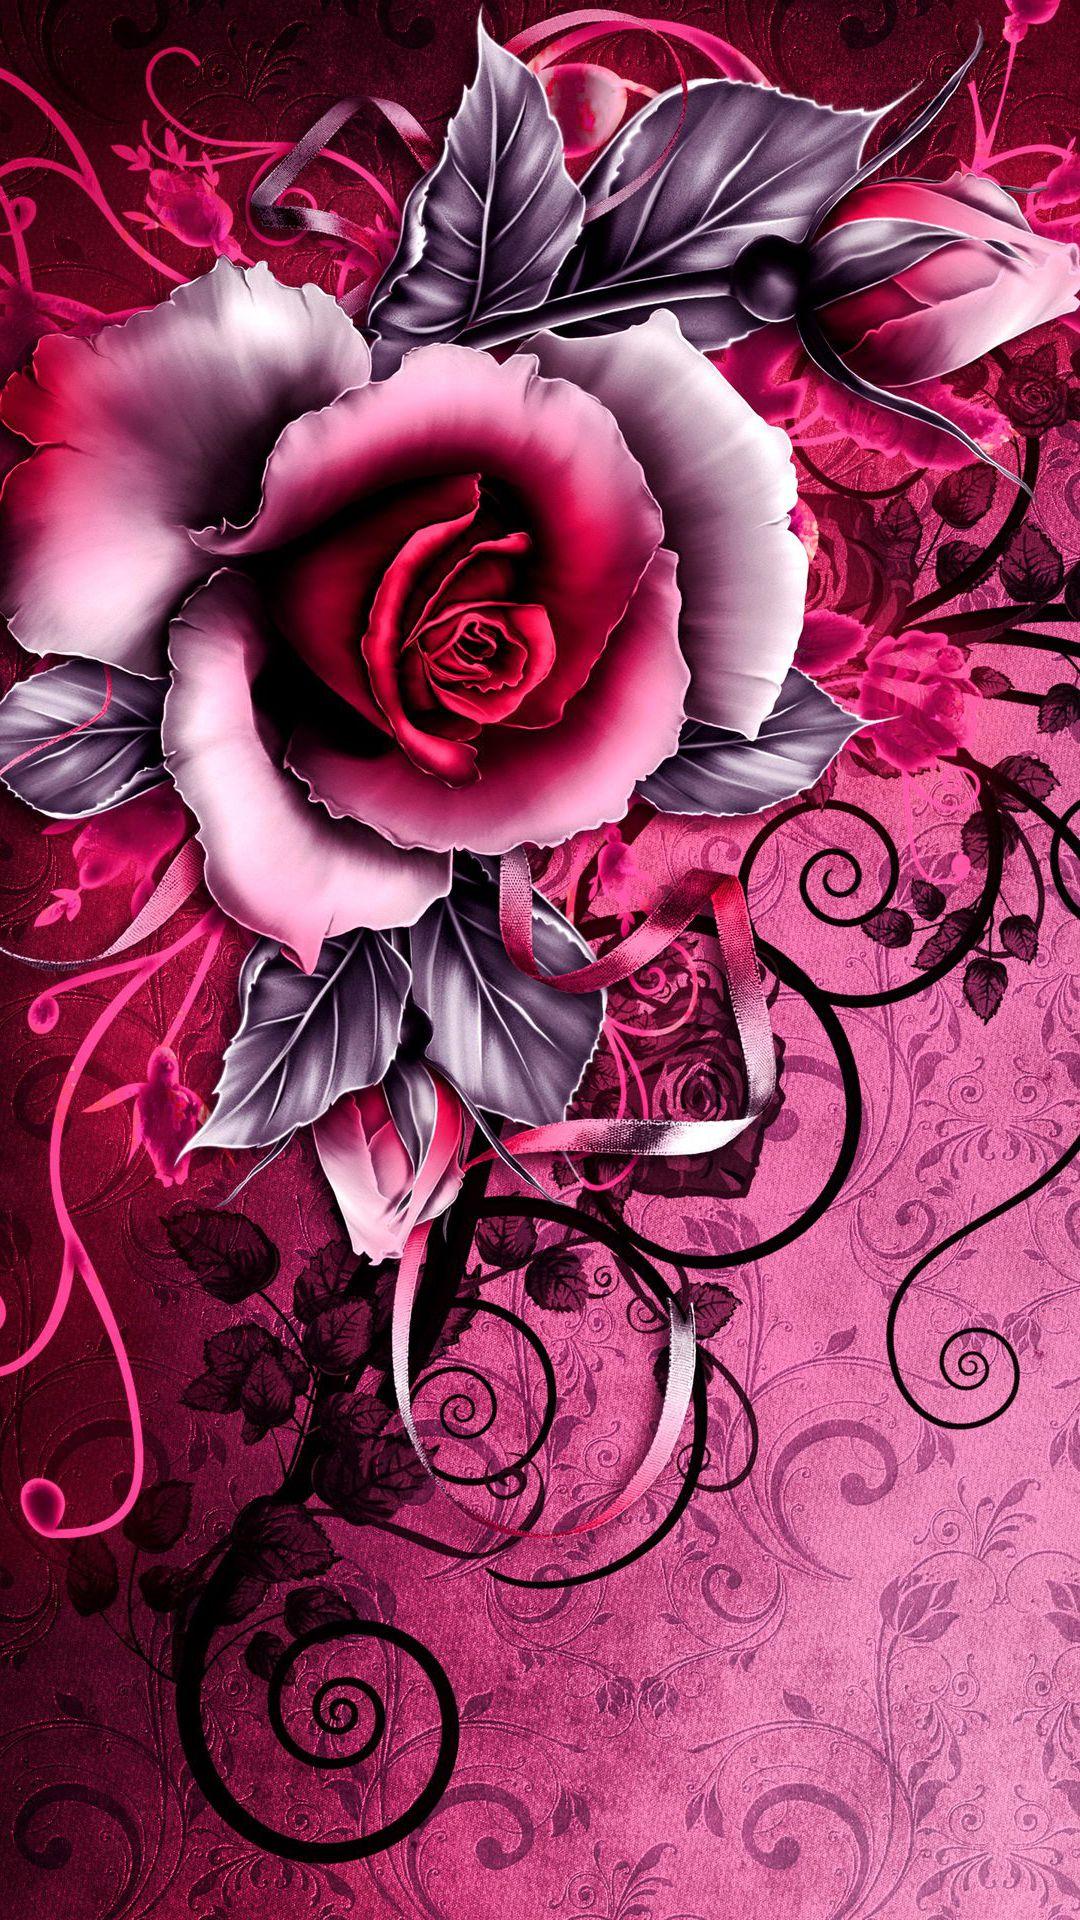 Vintage Tribal Red Rose Android Wallpaper free download